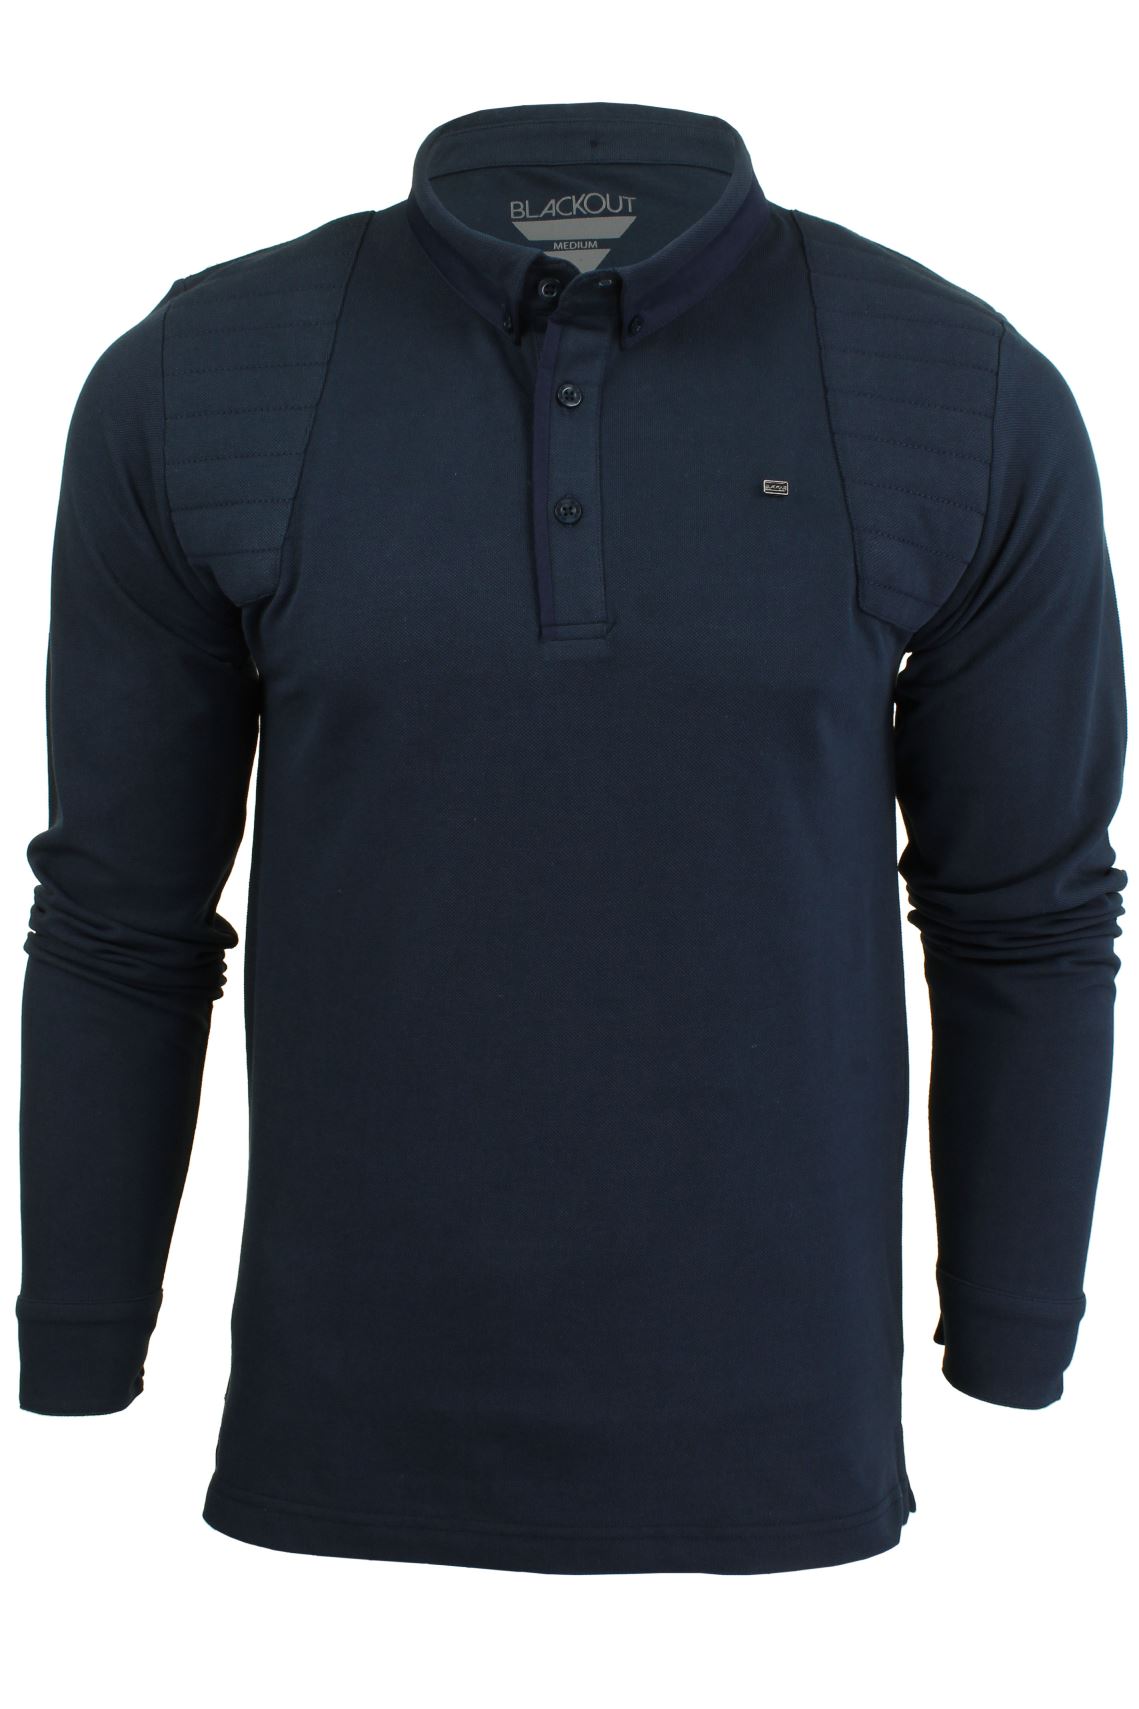 Mens Short Sleeved Polo Shirt from the Blackout Collection by Voi Jeans, 01, Dubb, Cole - Black Irish